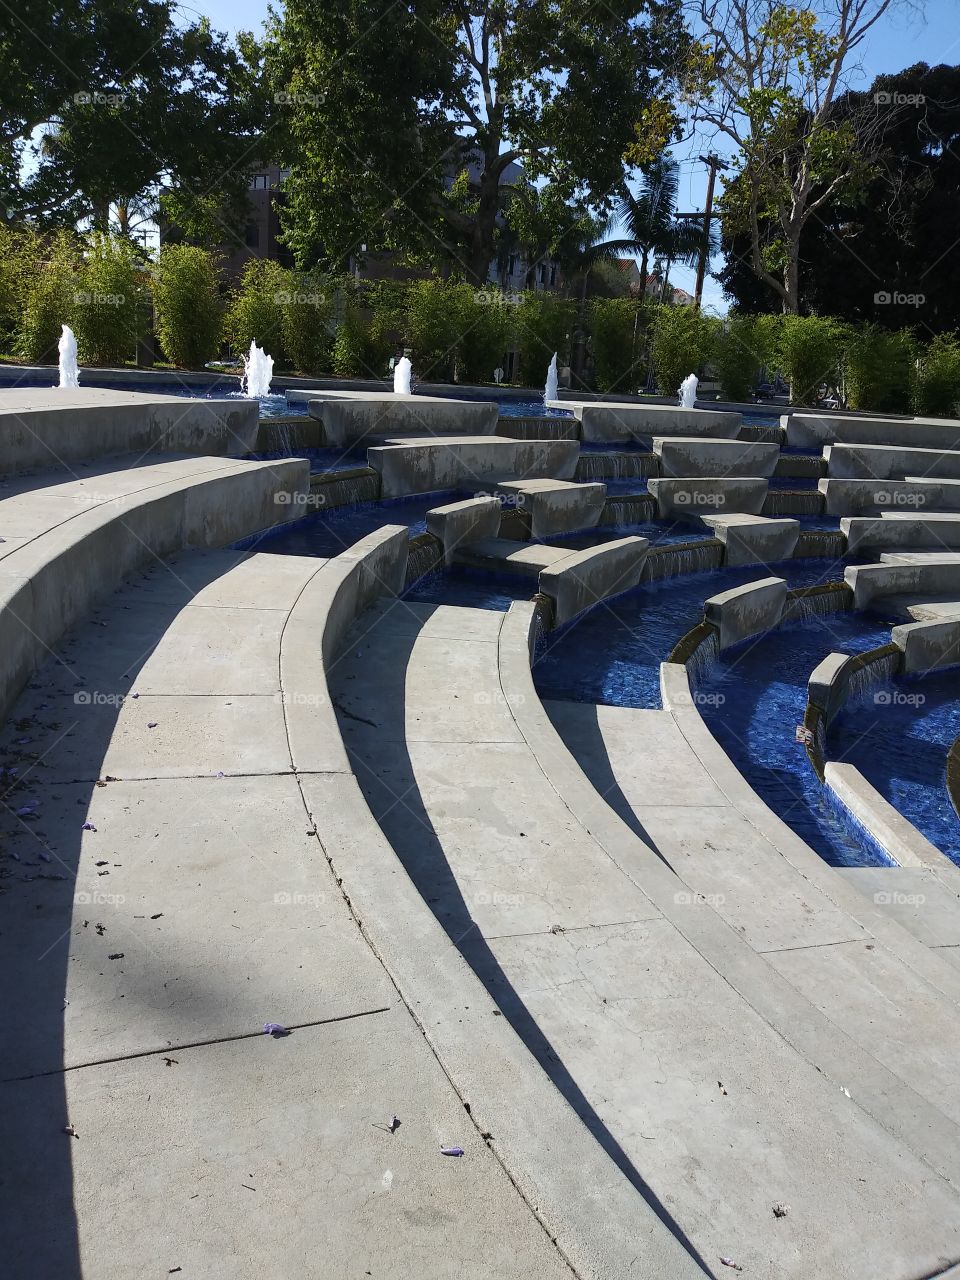 Scripps Curved Fountain